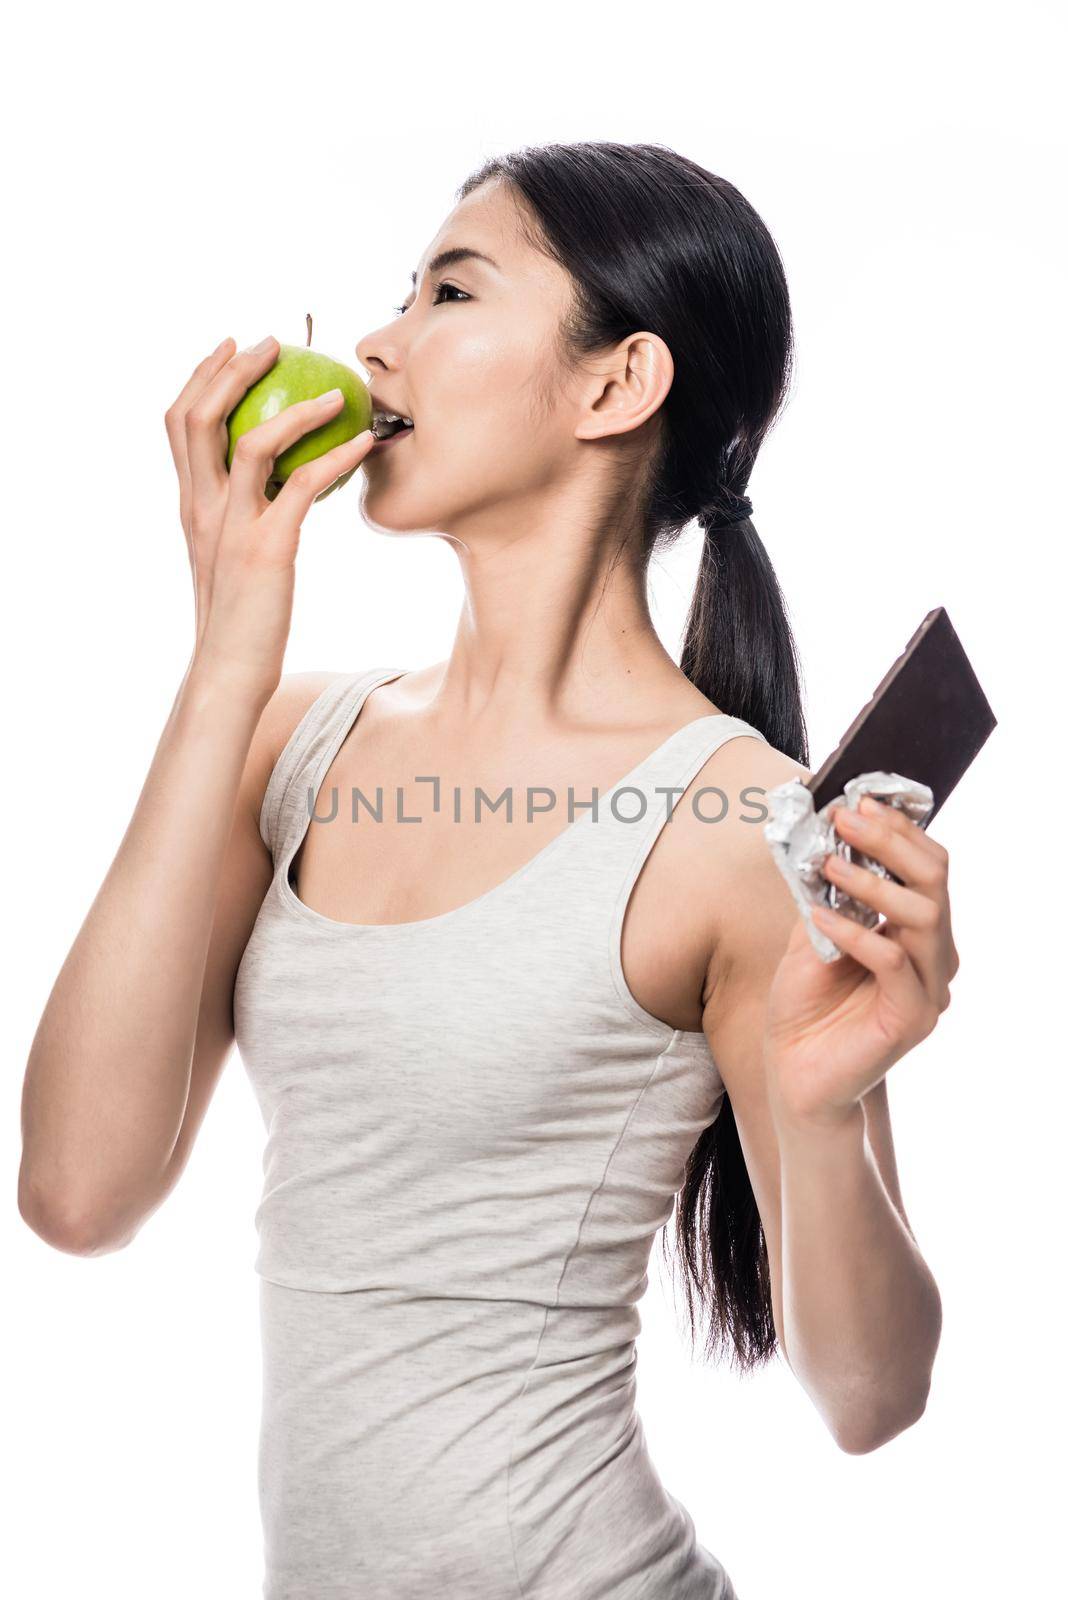 Attractive Asian woman opting for a healthy diet turning to bite into a fresh green apple while holding an unwrapped bar of chocolate aside